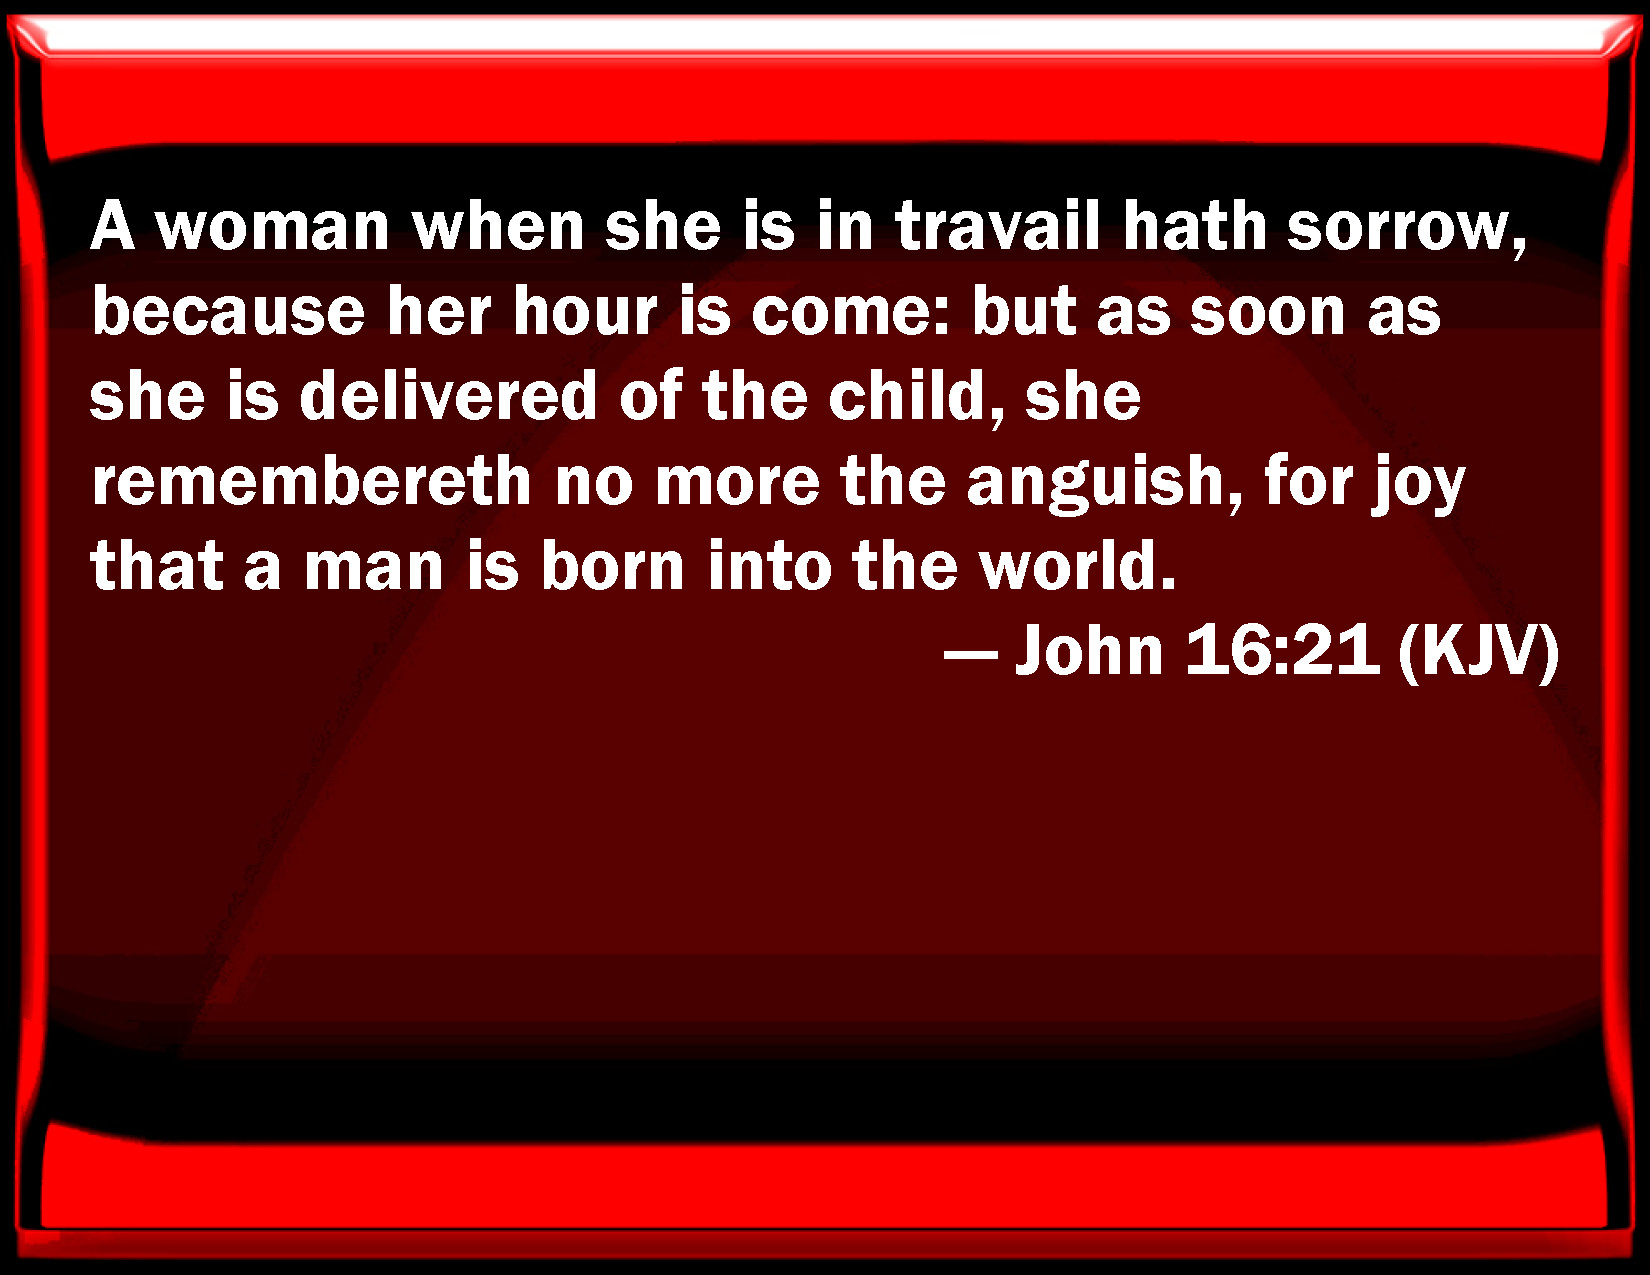 John 16:21 A woman when she is in travail has sorrow, because her hour is  come: but as soon as she is delivered of the child, she remembers no more  the anguish,